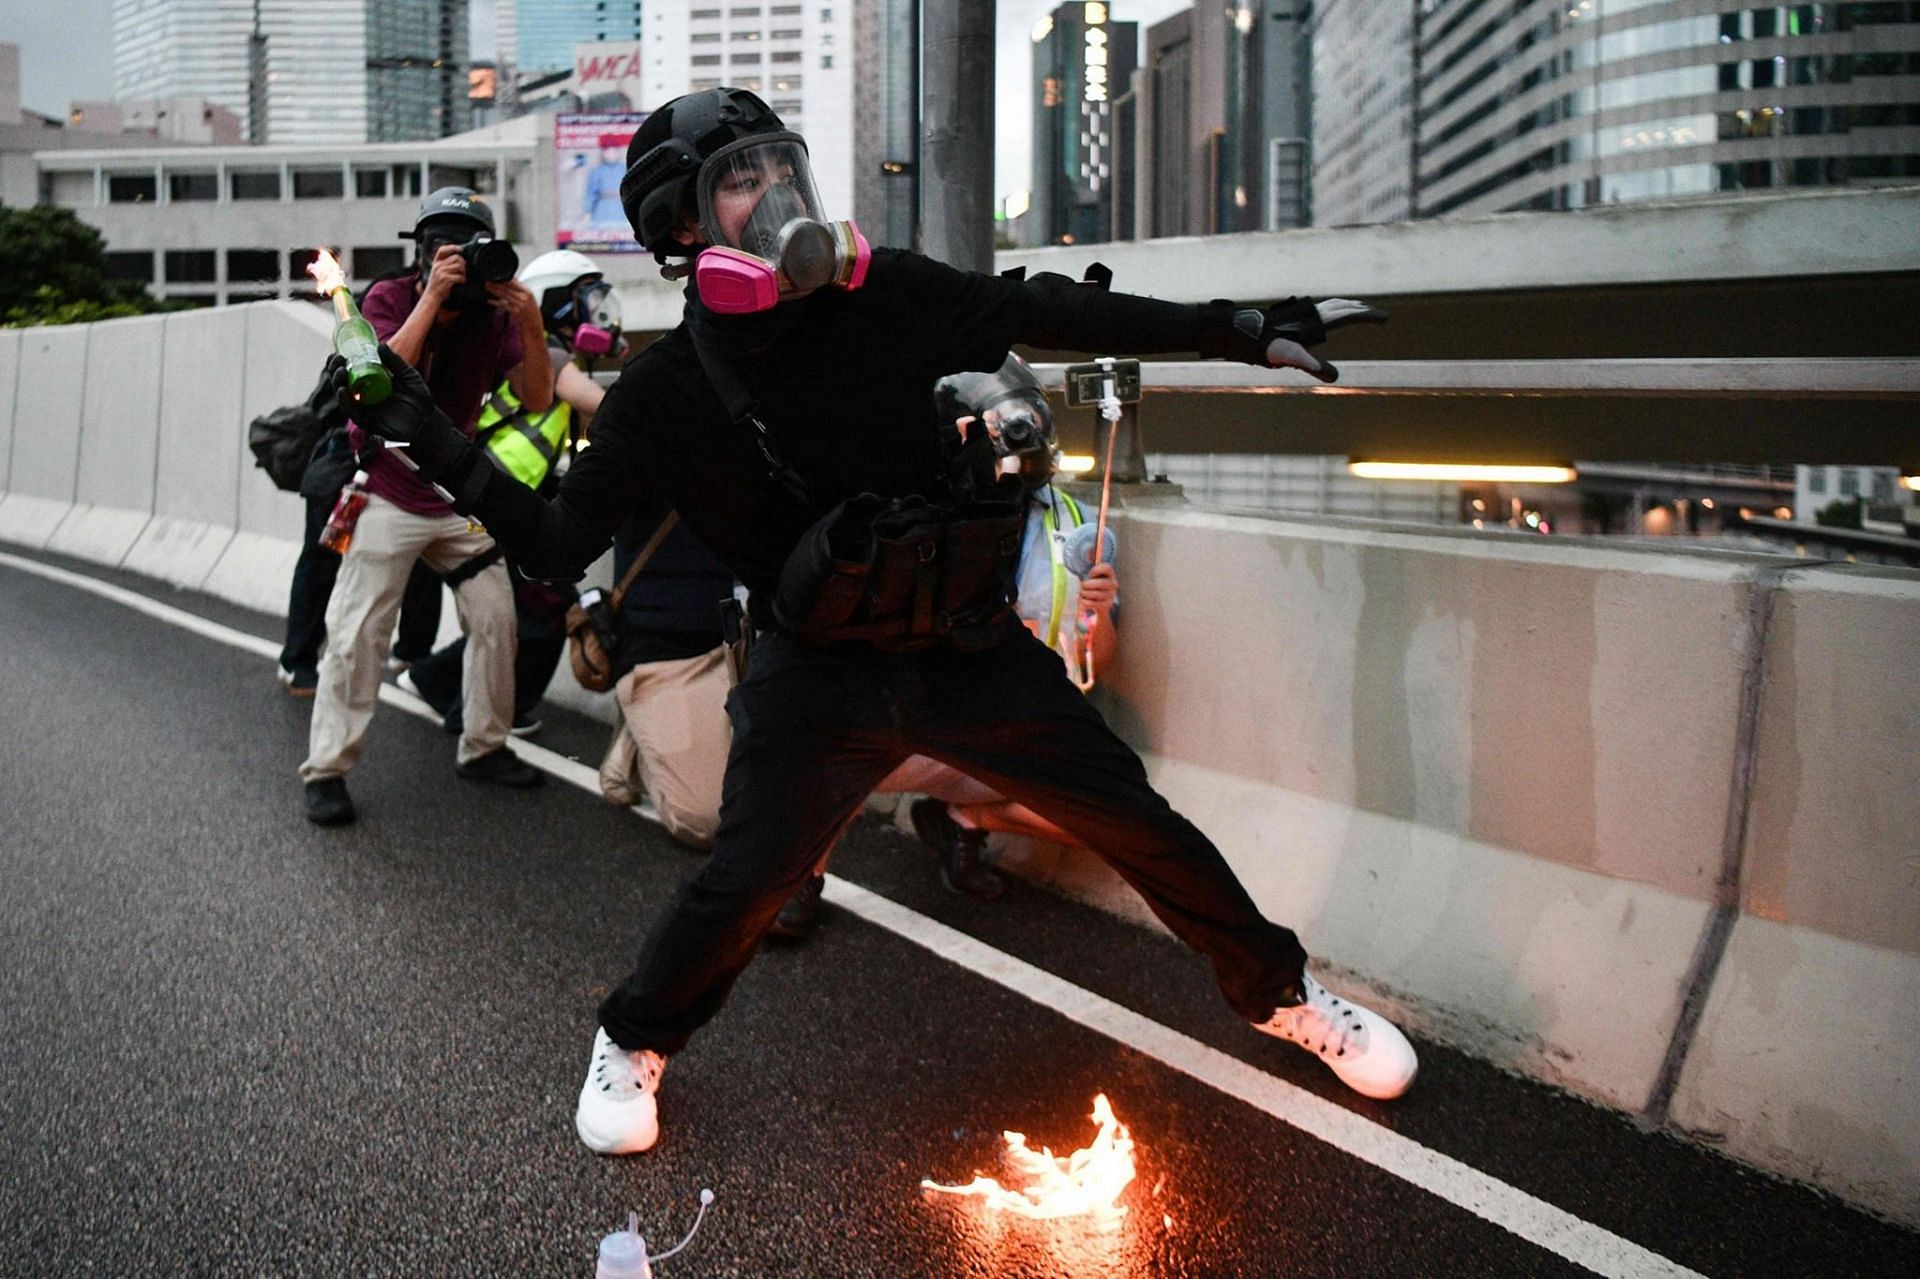 A protestor using a Molotov cocktail in Hong Kong (Image via AFP/Anthony Wallace/Getty Images)